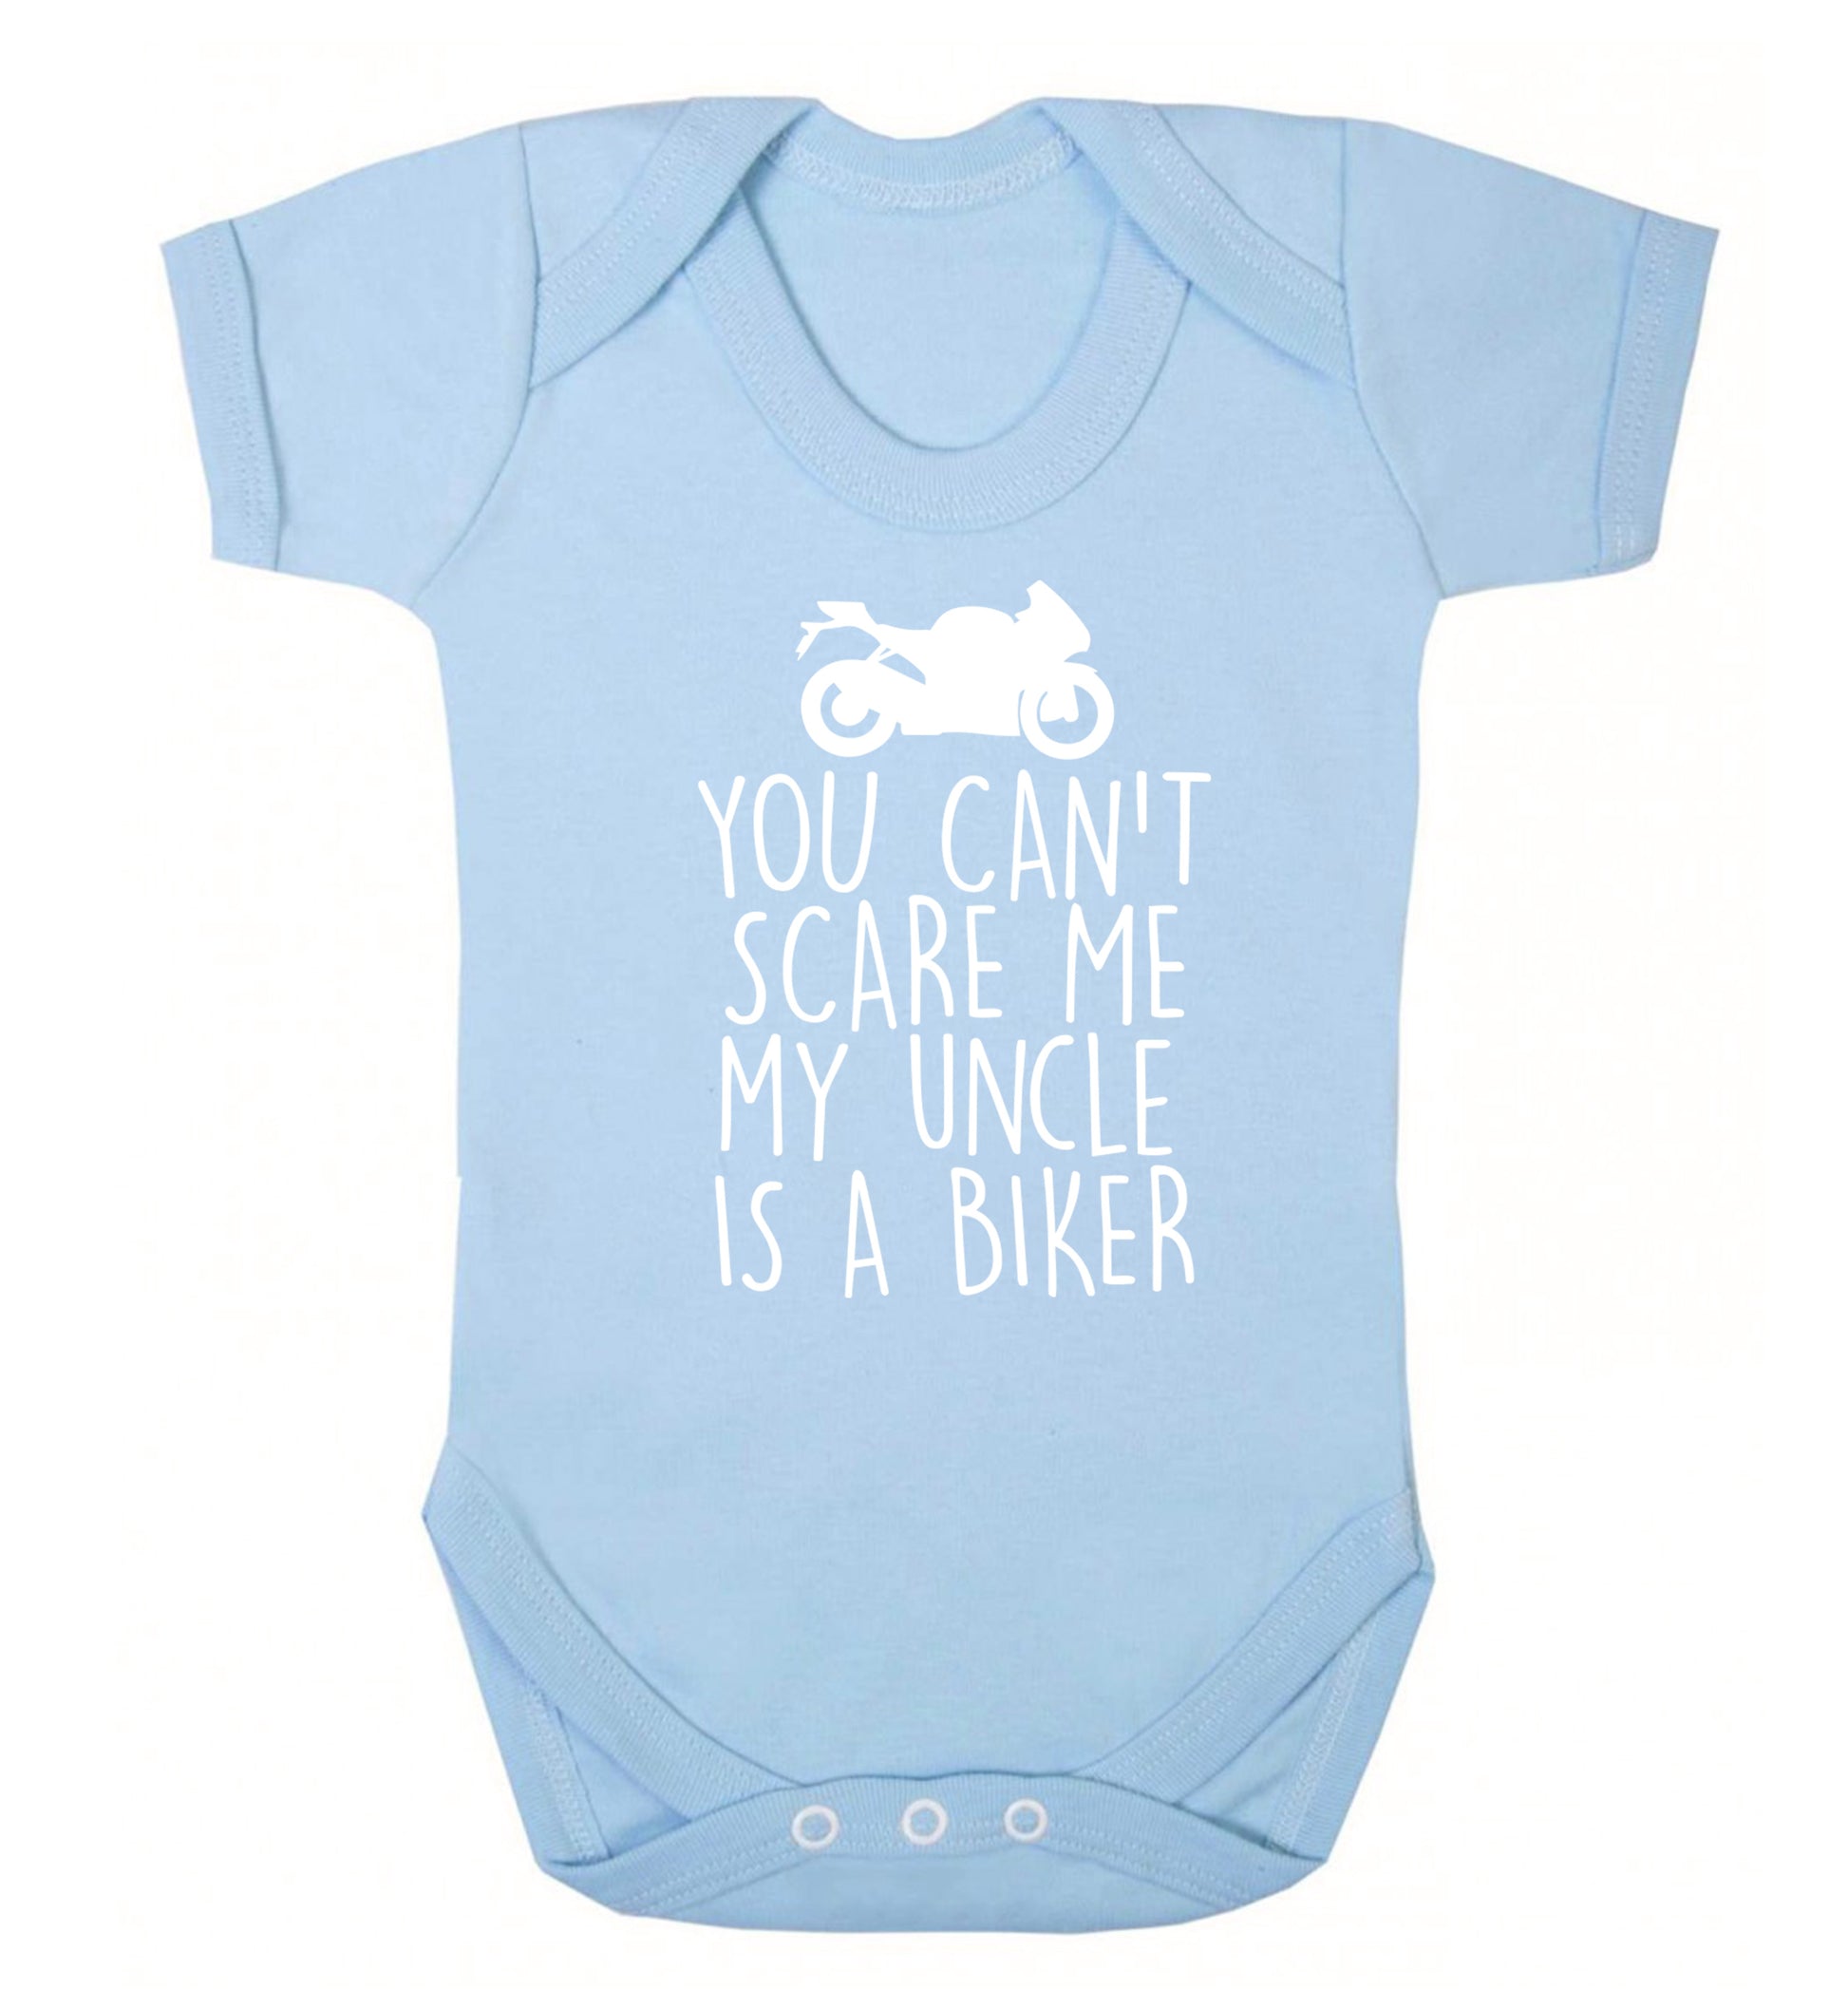 You can't scare me my uncle is a biker Baby Vest pale blue 18-24 months